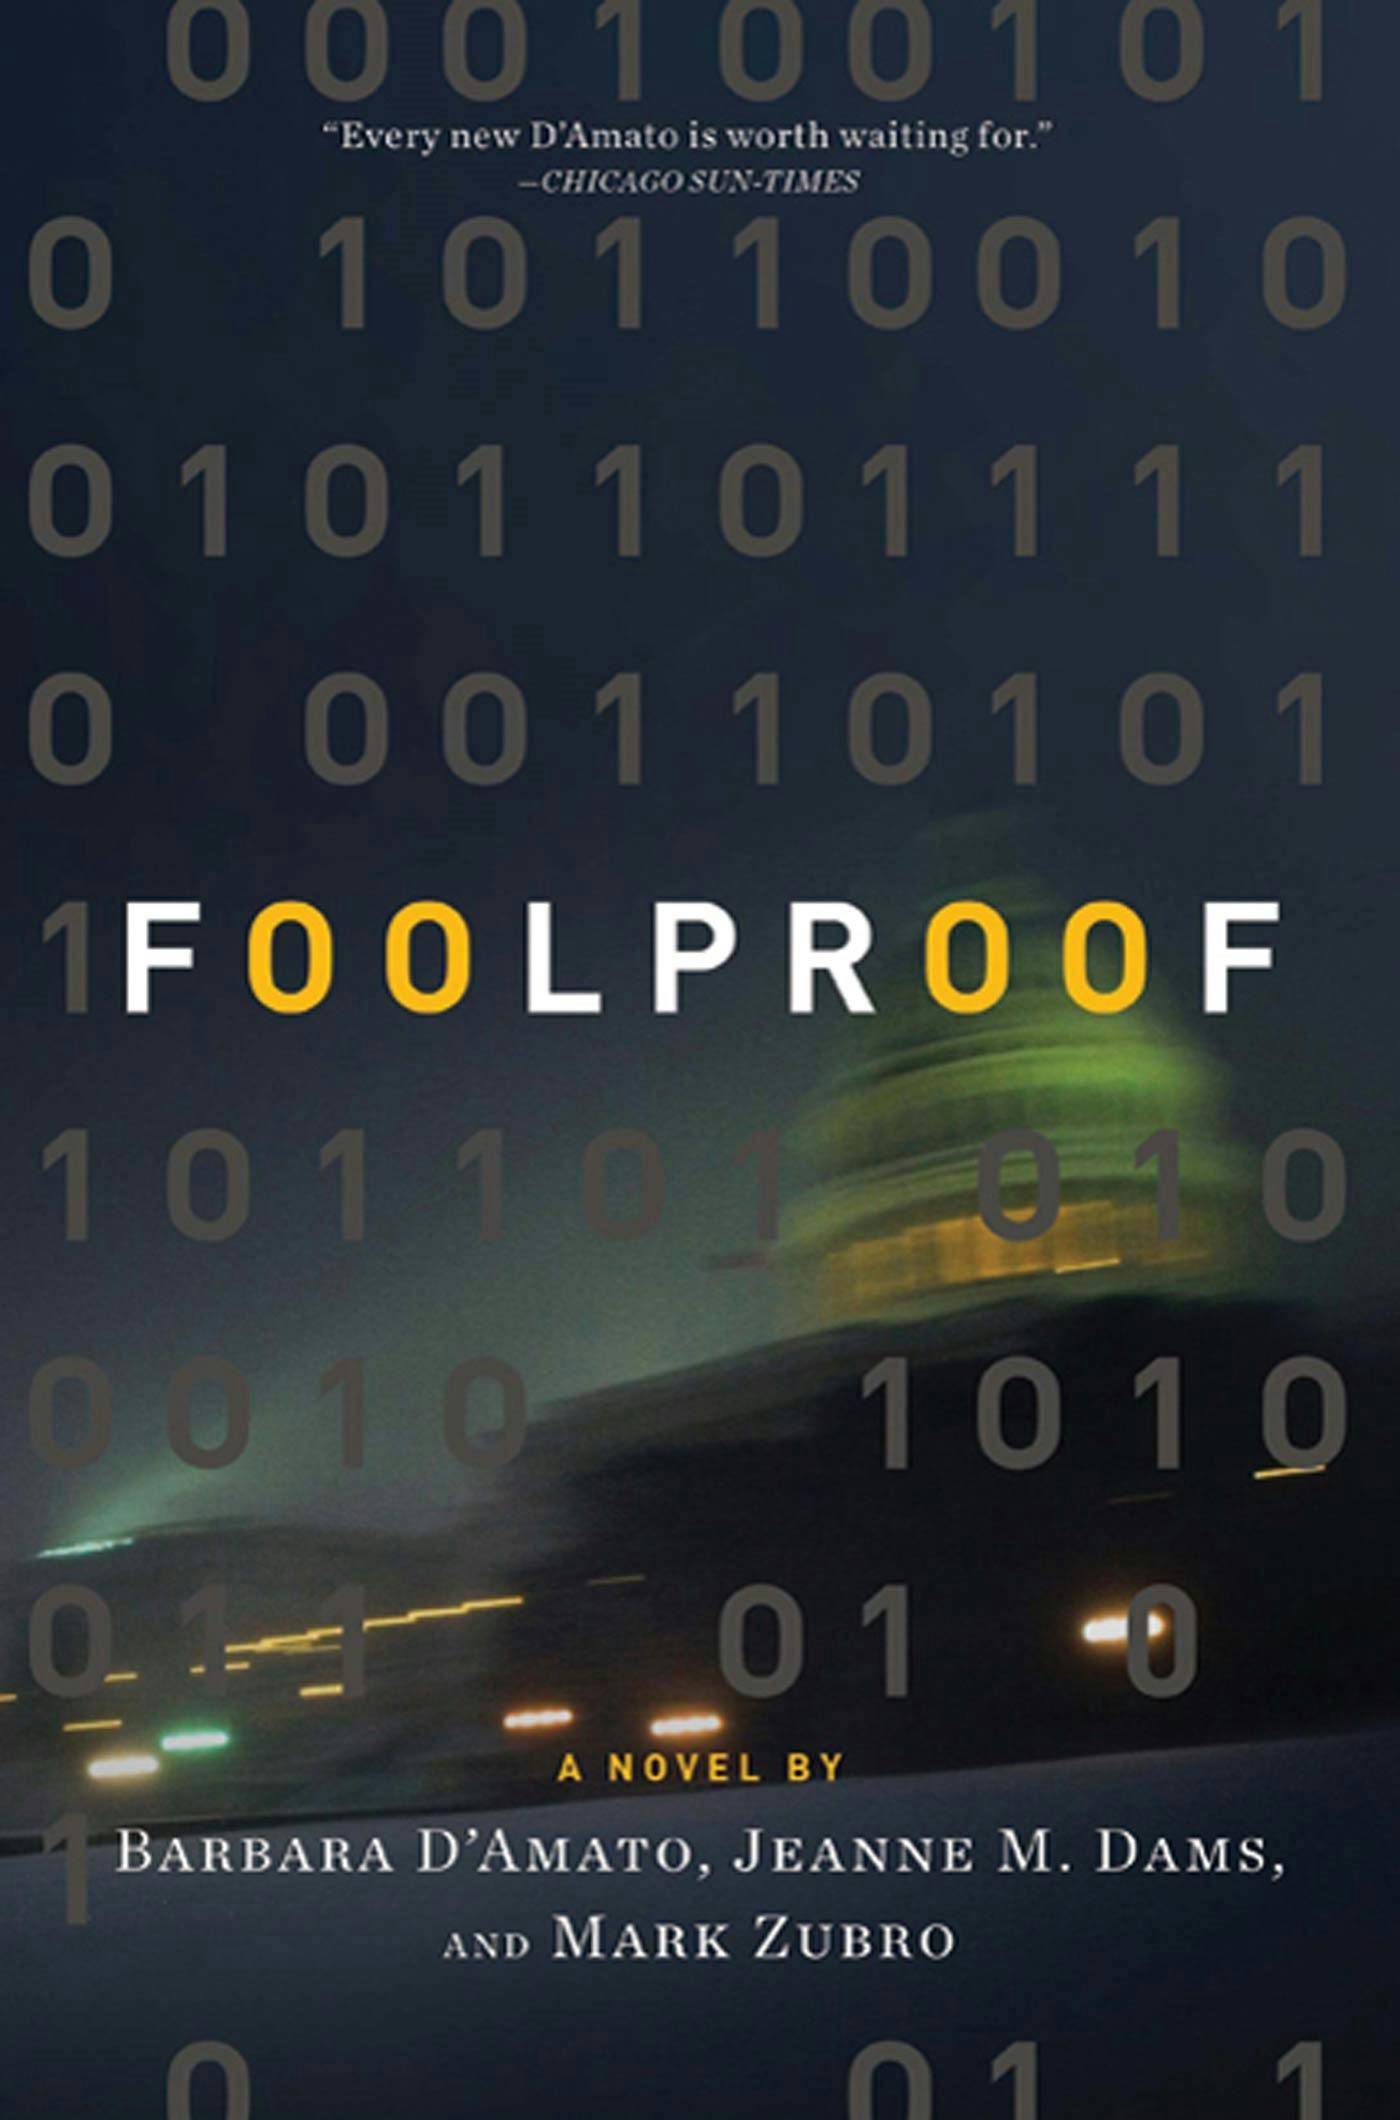 Cover for the book titled as: Foolproof